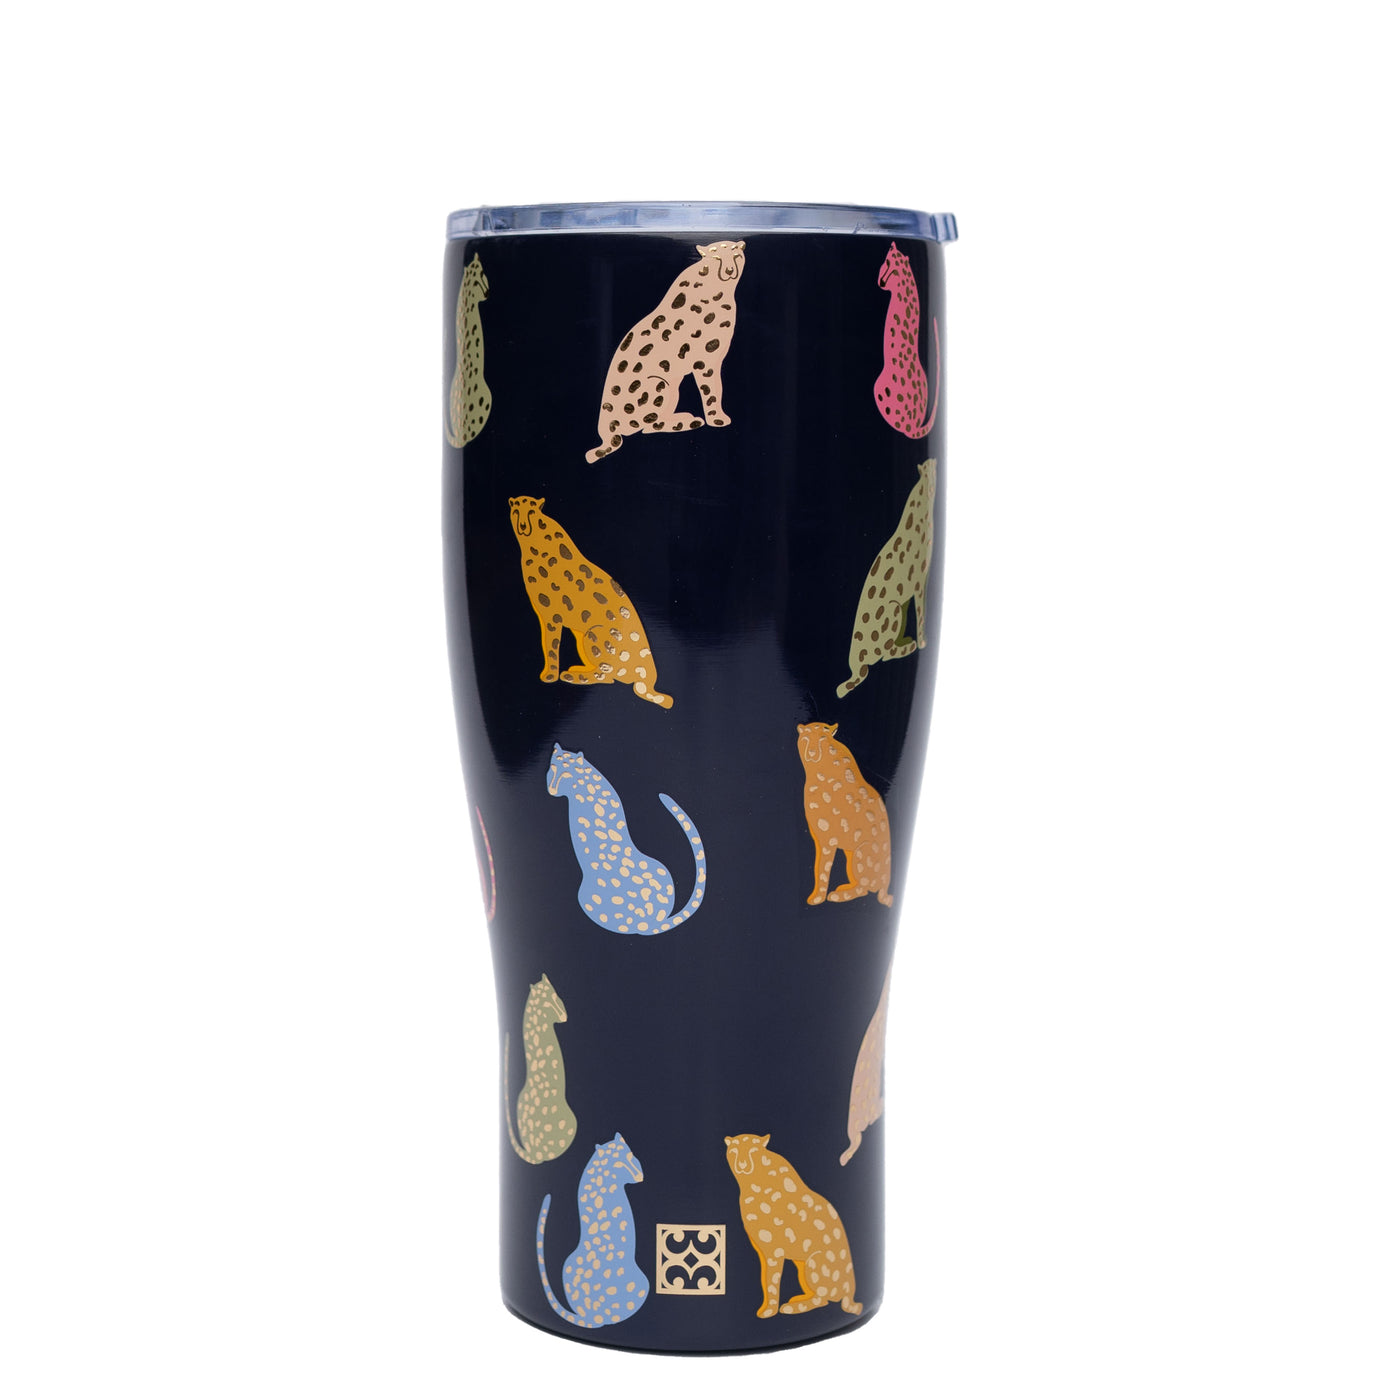 Leader of the Pack | Stainless Large Curved Tumbler - Mary Square, LLC